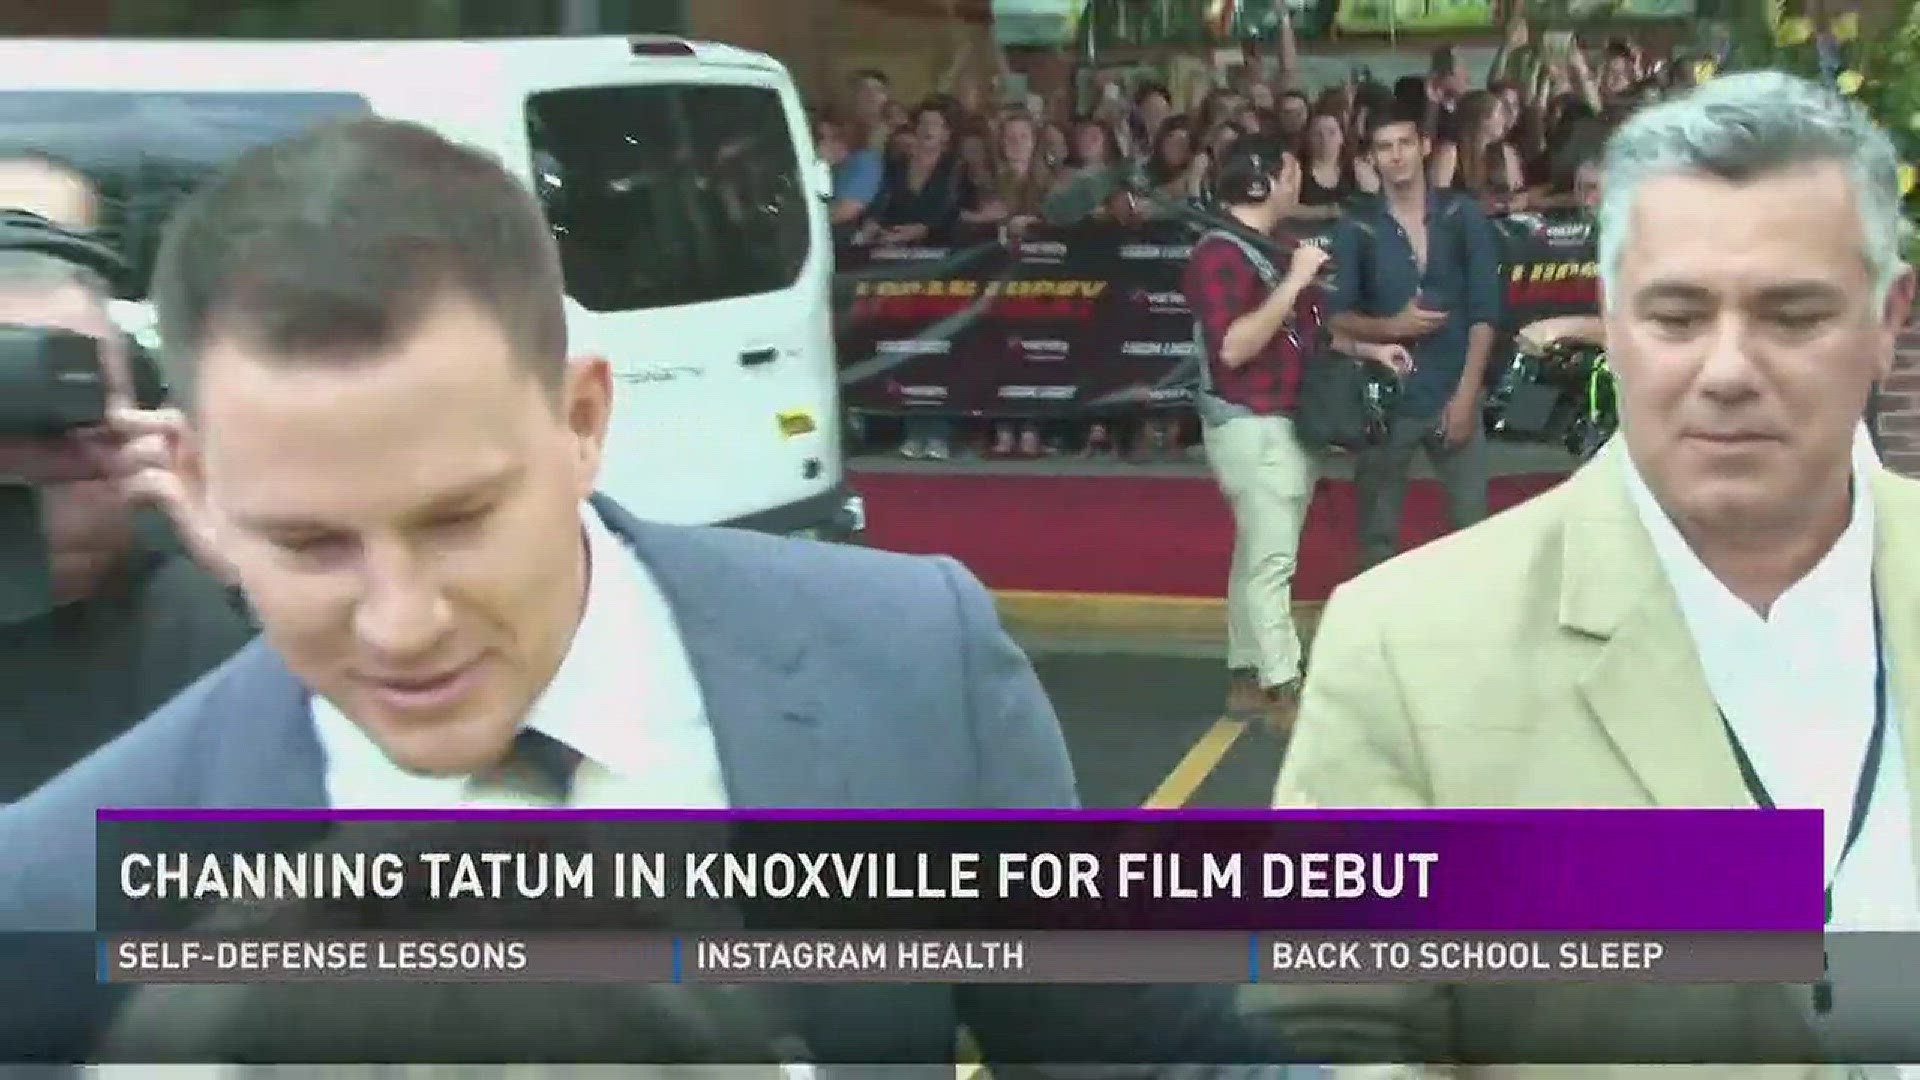 Aug. 9, 2017: Hollywood A-lister Channing Tatum premiered his newest flick "Logan Lucky" in Knoxville.